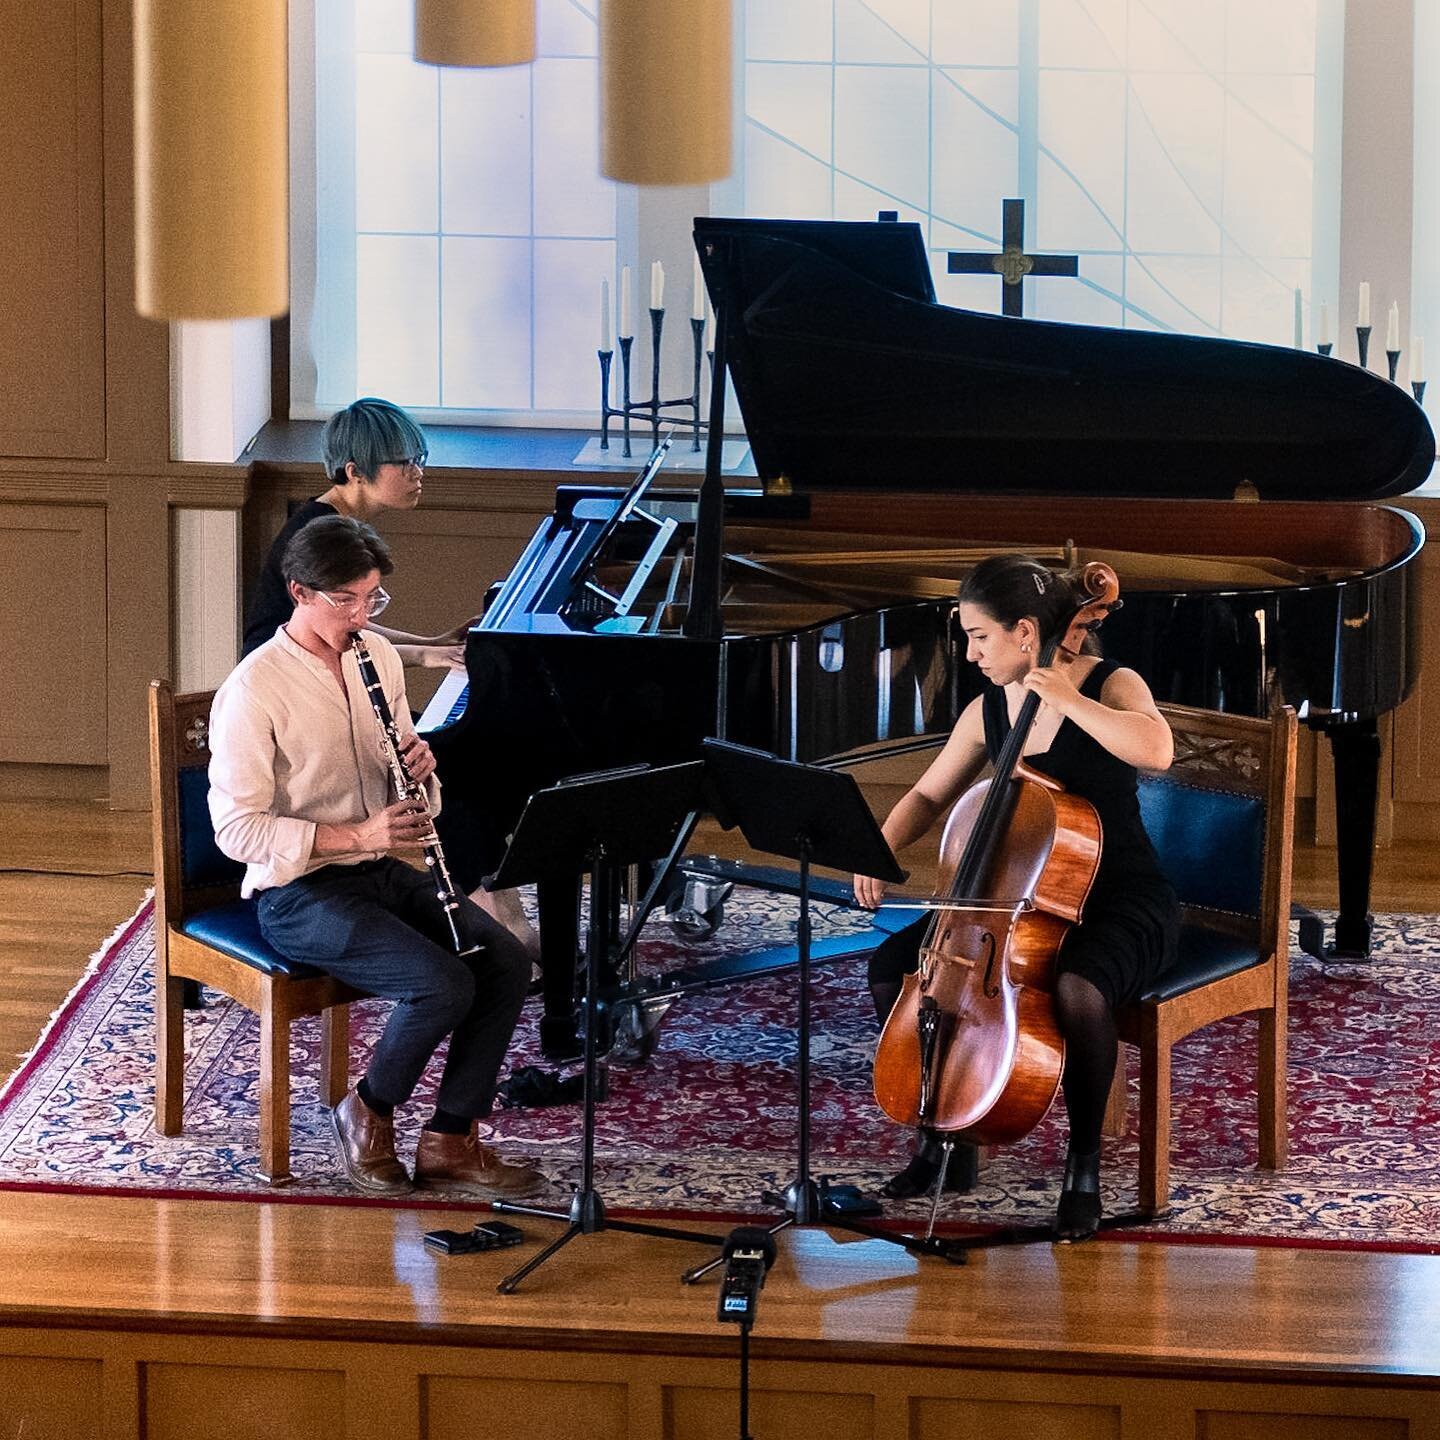 It was such a pleasure to curate this chamber music concert, play great music with my favorite people, and raise money for a good cause. Thanks to everyone who came out or donated, and looking forward to the next show! Video is going up soon if you&r